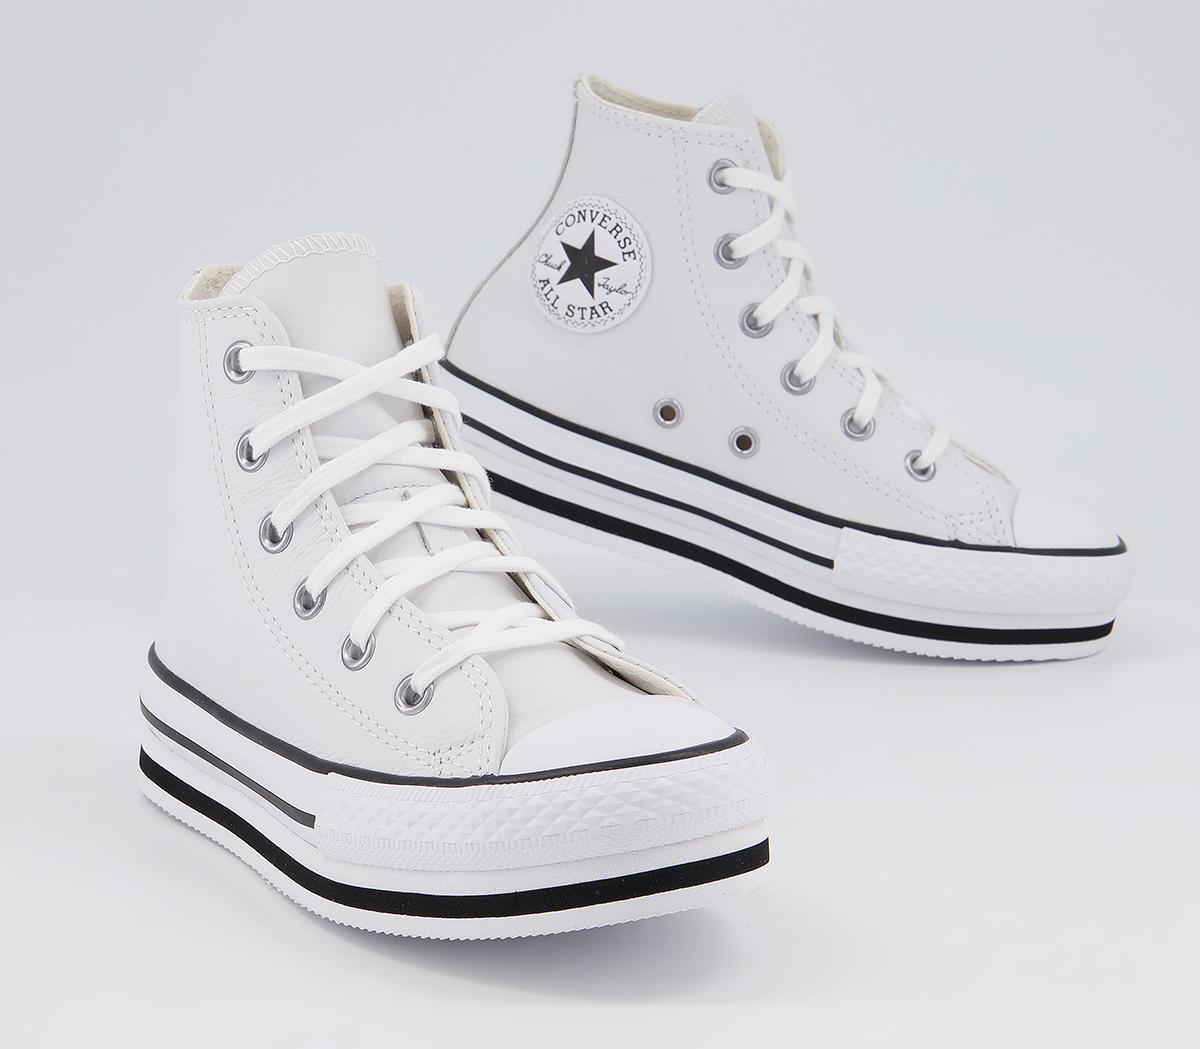 Converse All Star Eva Lift Hi Youth Trainers White White Black Leather ...